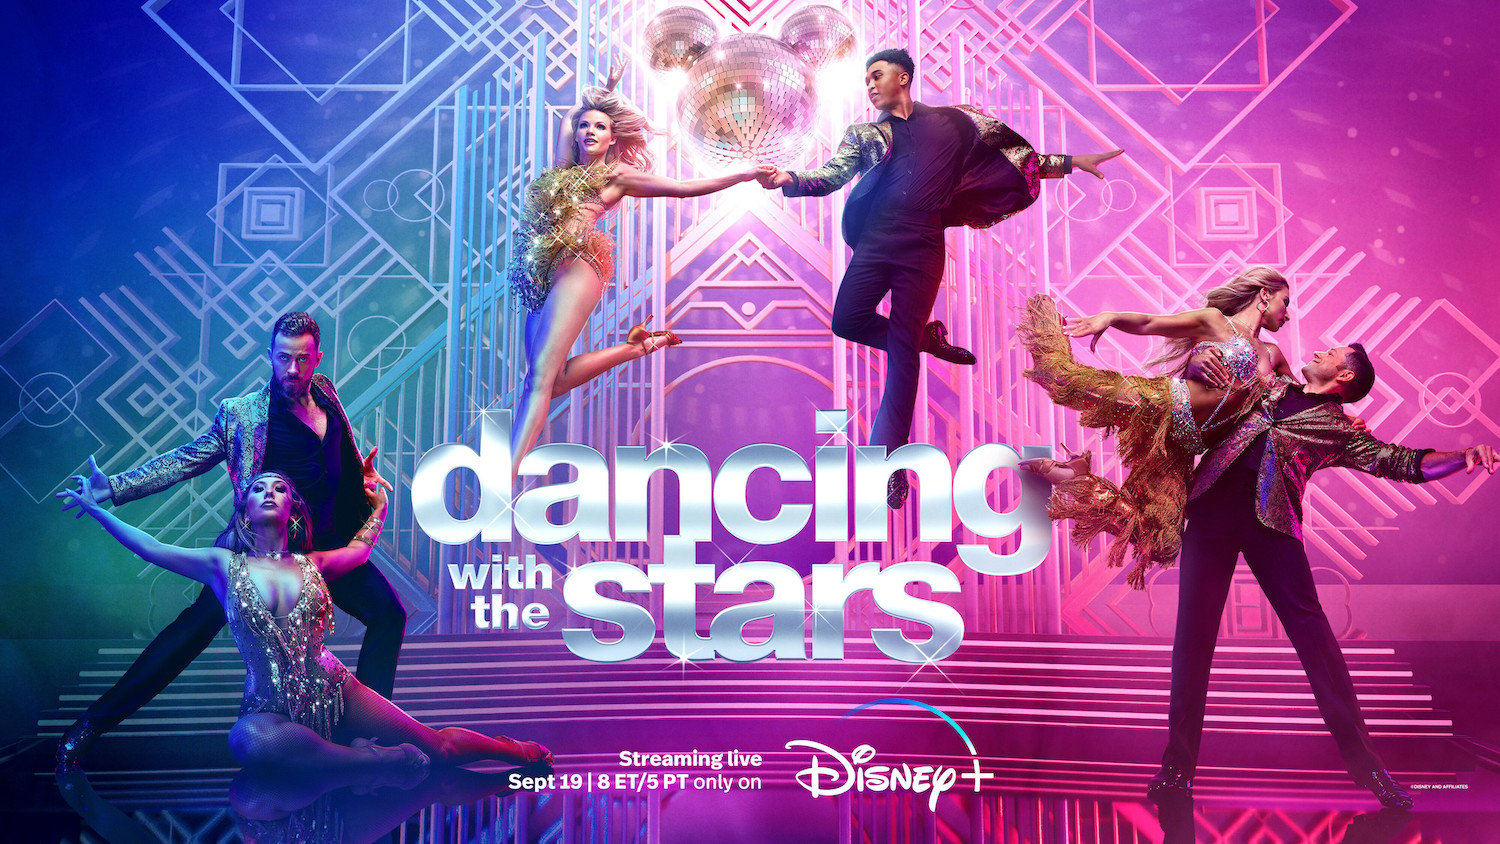 ‘Dancing with the Stars’ Fans Say ‘Too Many Rumbas’ for Bond Night